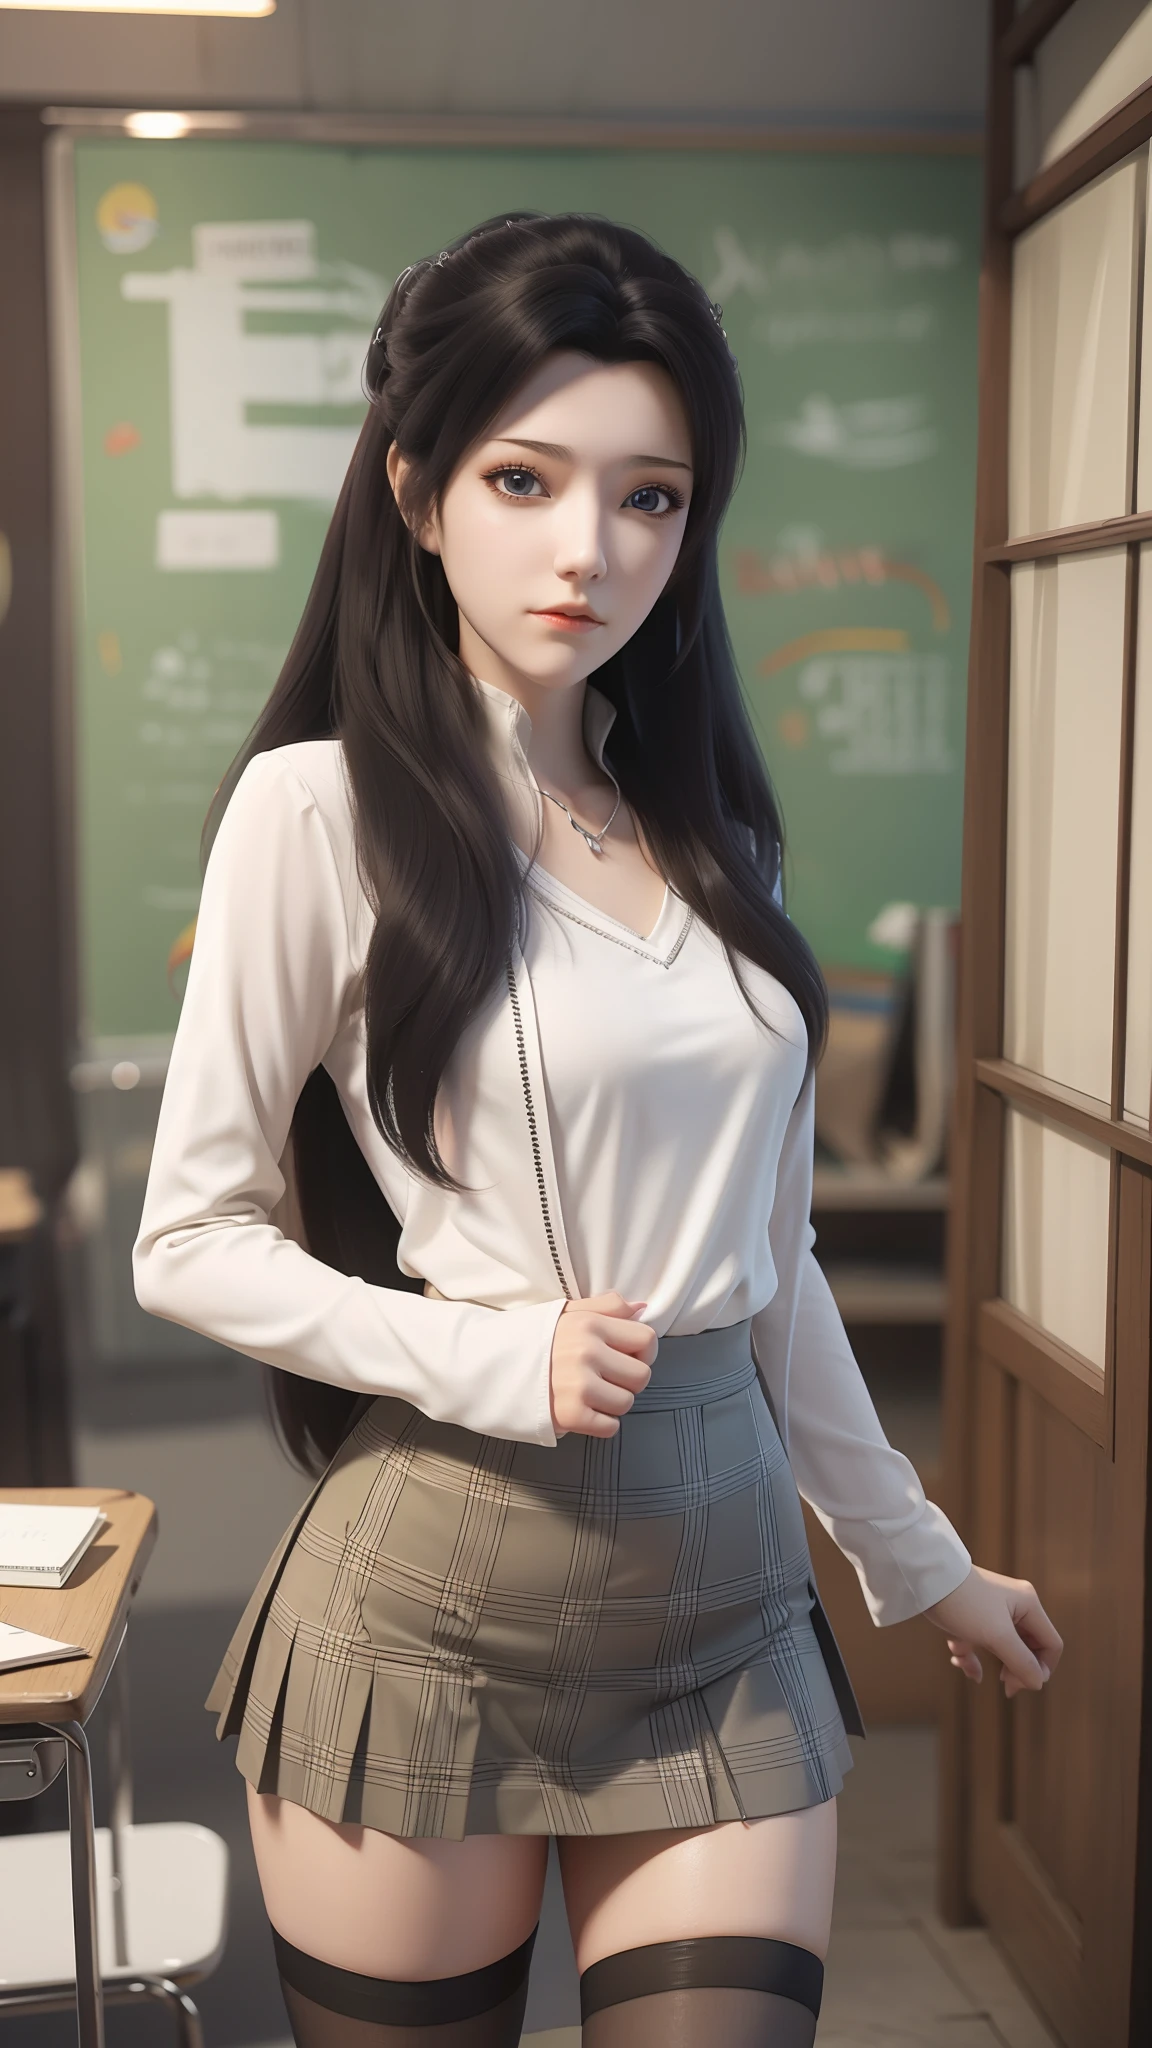 Arad woman poses for a photo in a short skirt and white shirt, Surrealism female students, Surrealism female students, Realistic , photorealistic anime girl rendering, thighhighs and skirt, 3 d anime realistic, small curvaceous , wearing skirt and high socks, Photorealistic anime, cute female student, Realistic anime 3 D style, Female Student